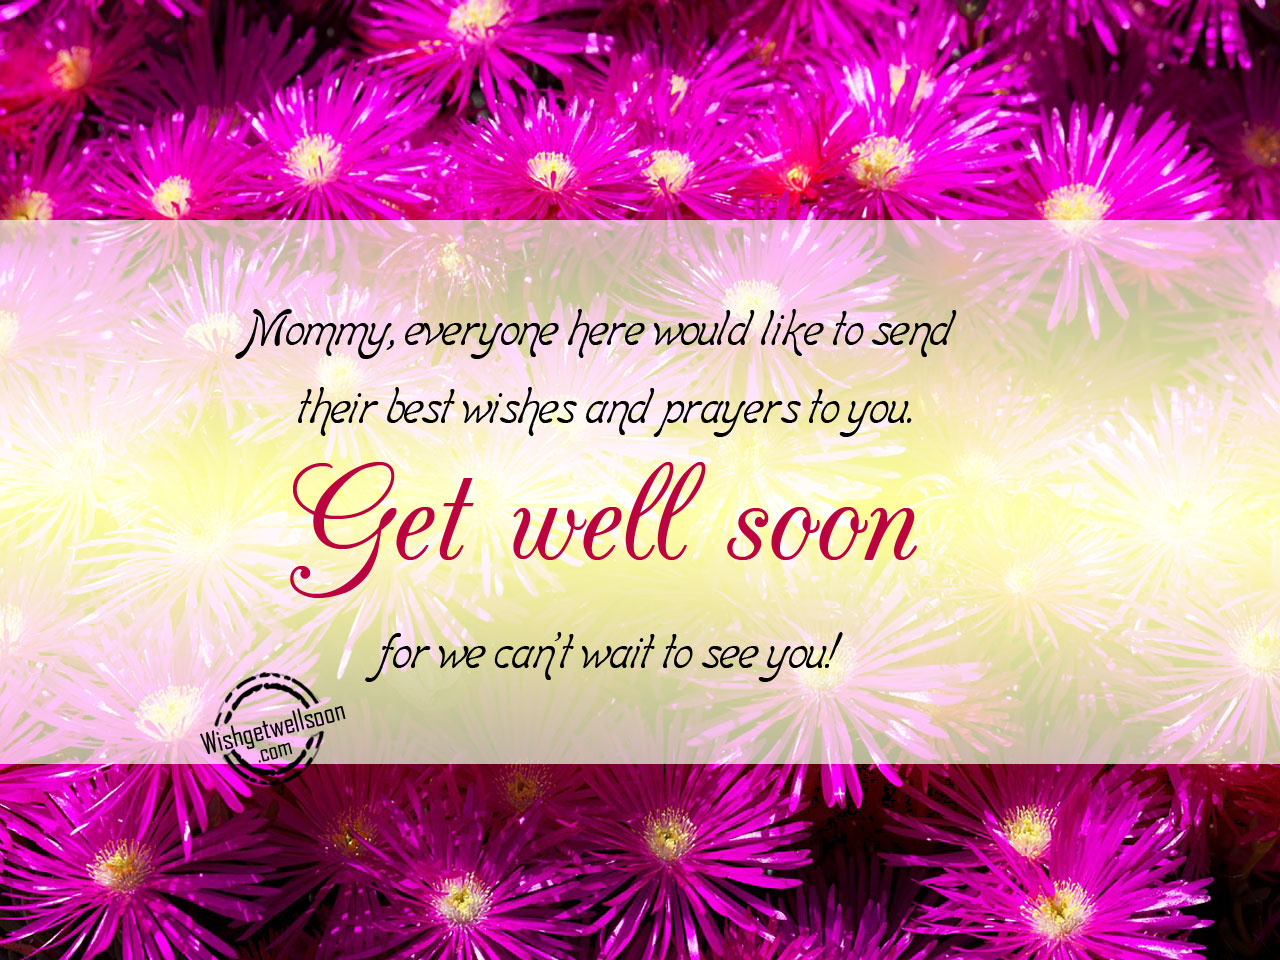 I send you wishes for get well soon Mommy